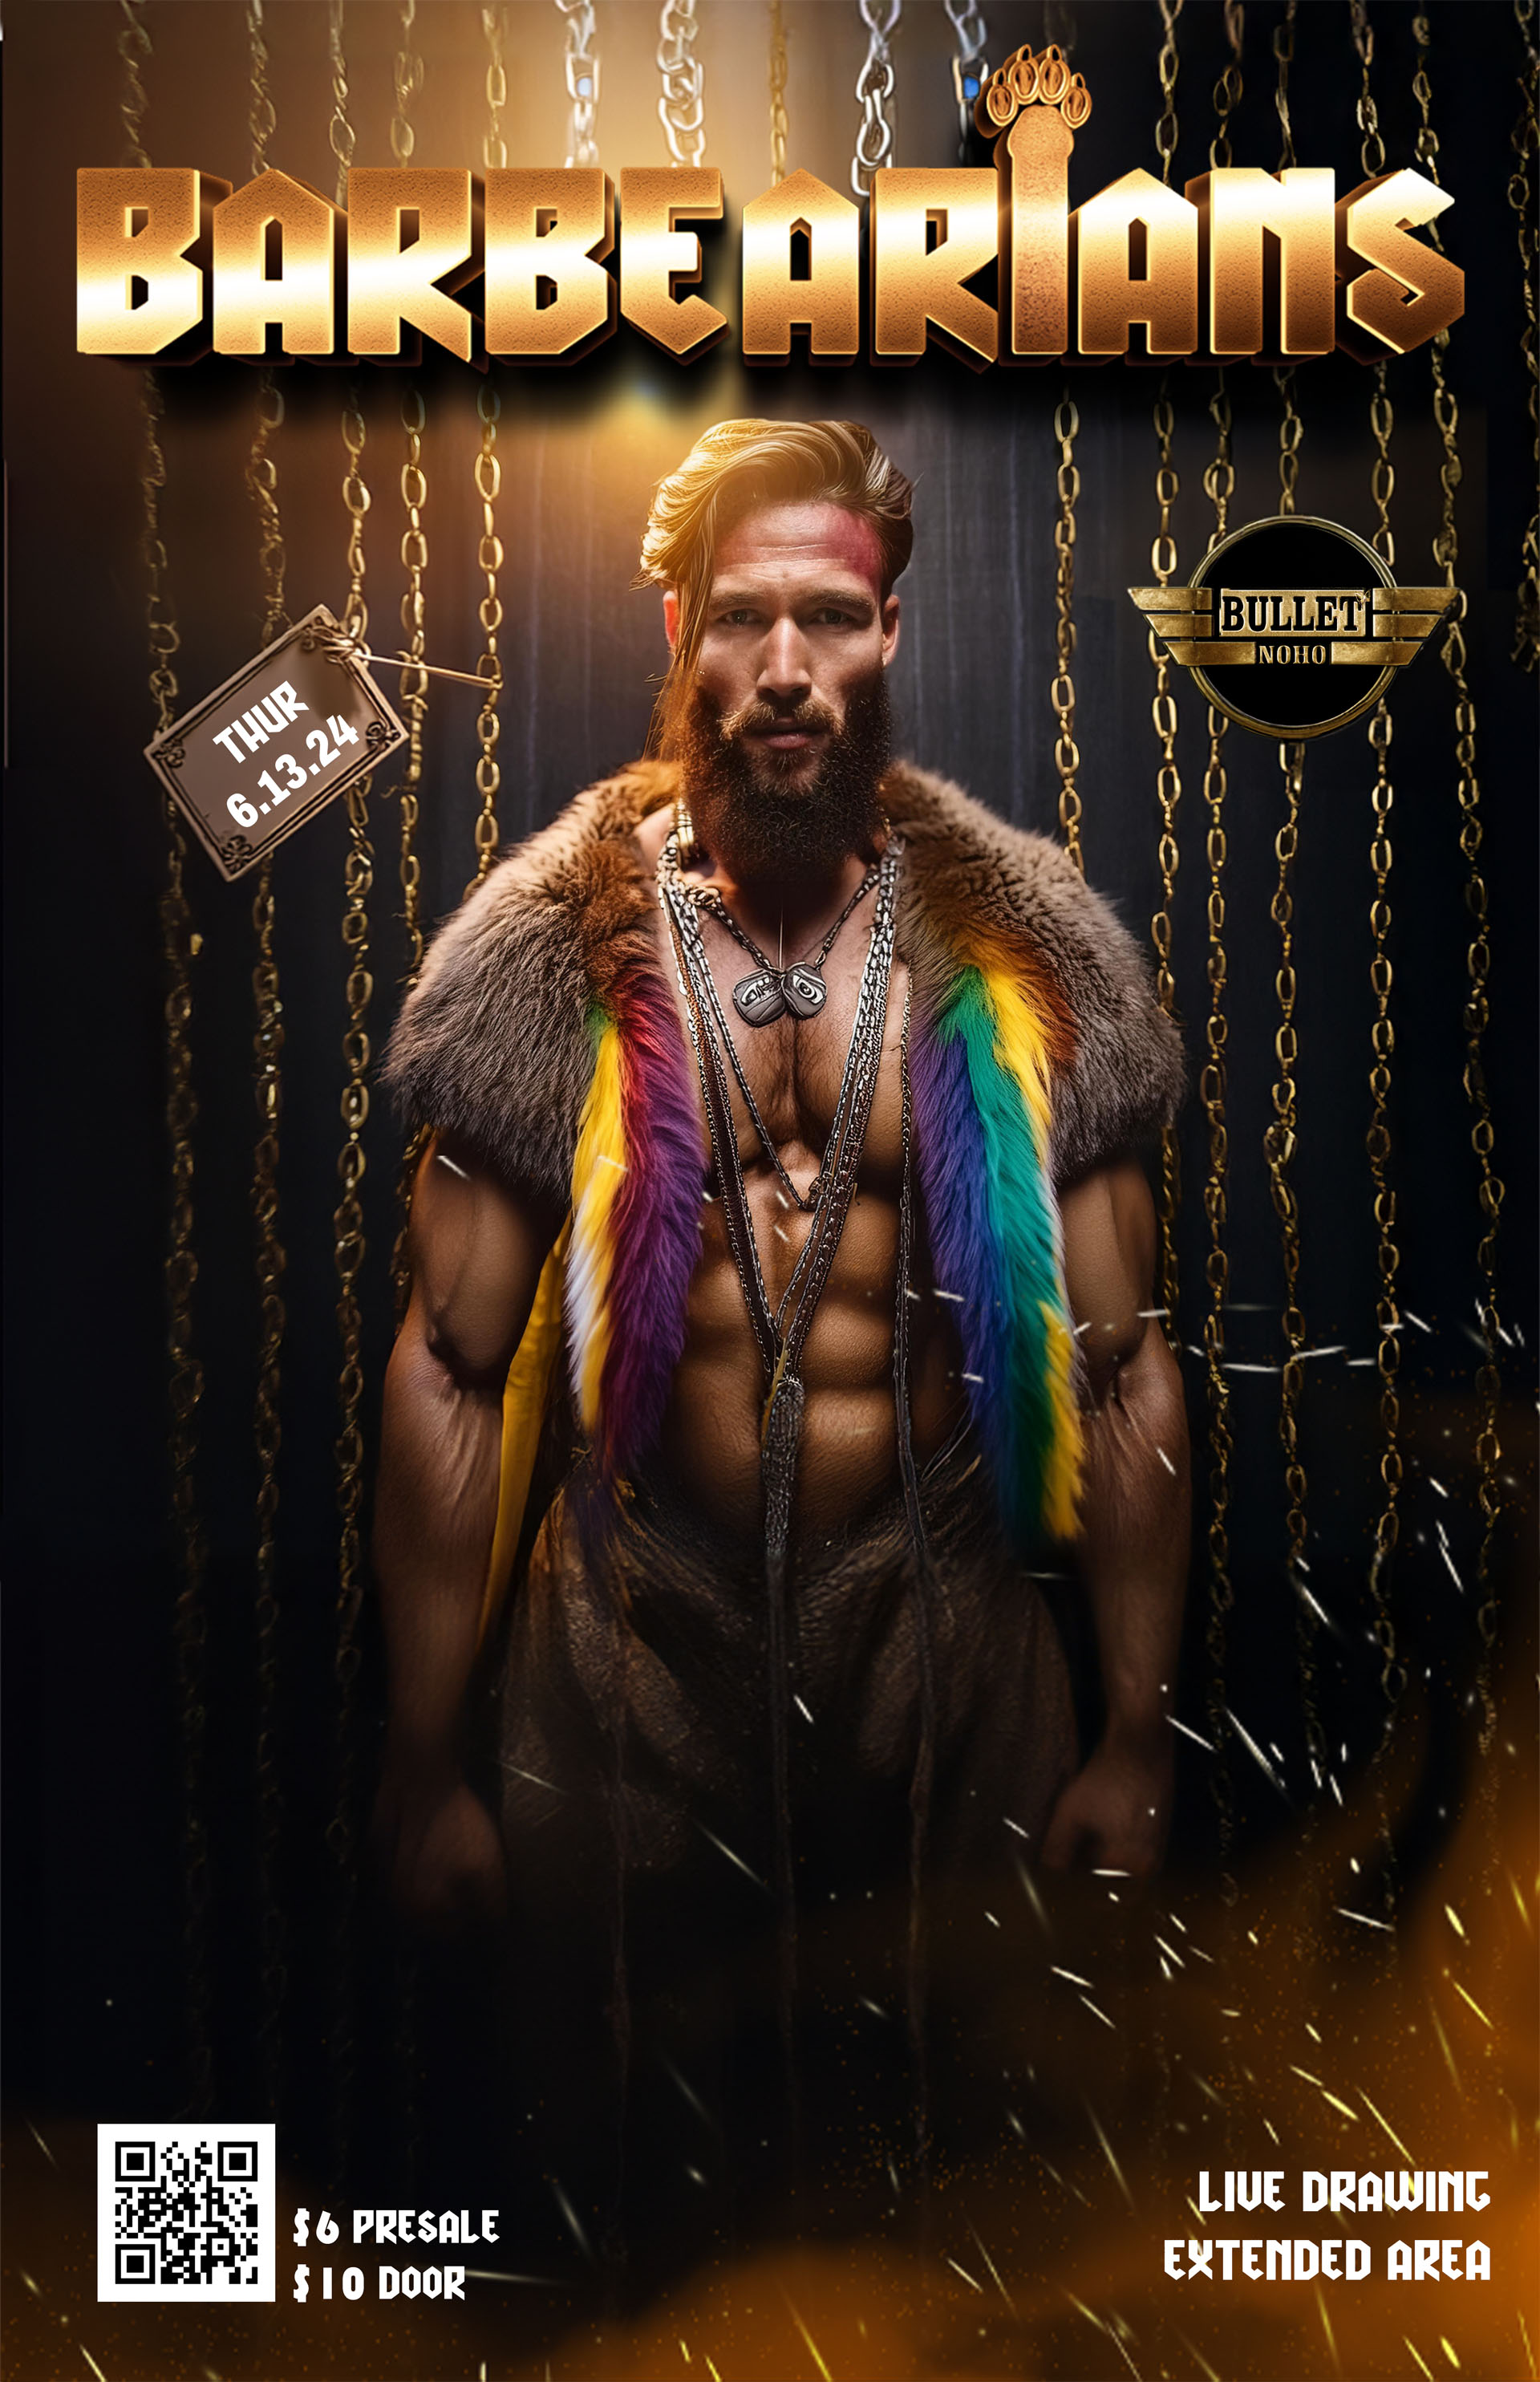 THE BULLET BAR Presents BARBEARIANS, A Bear & Leather Event: Thursday, 06/13/24 at 9:00 PM. Presale Tickets $8 and Door Cover $10. Presales: https://www.eventbrite.com/e/barbearians-the-bullet-noho-tickets-902841462117